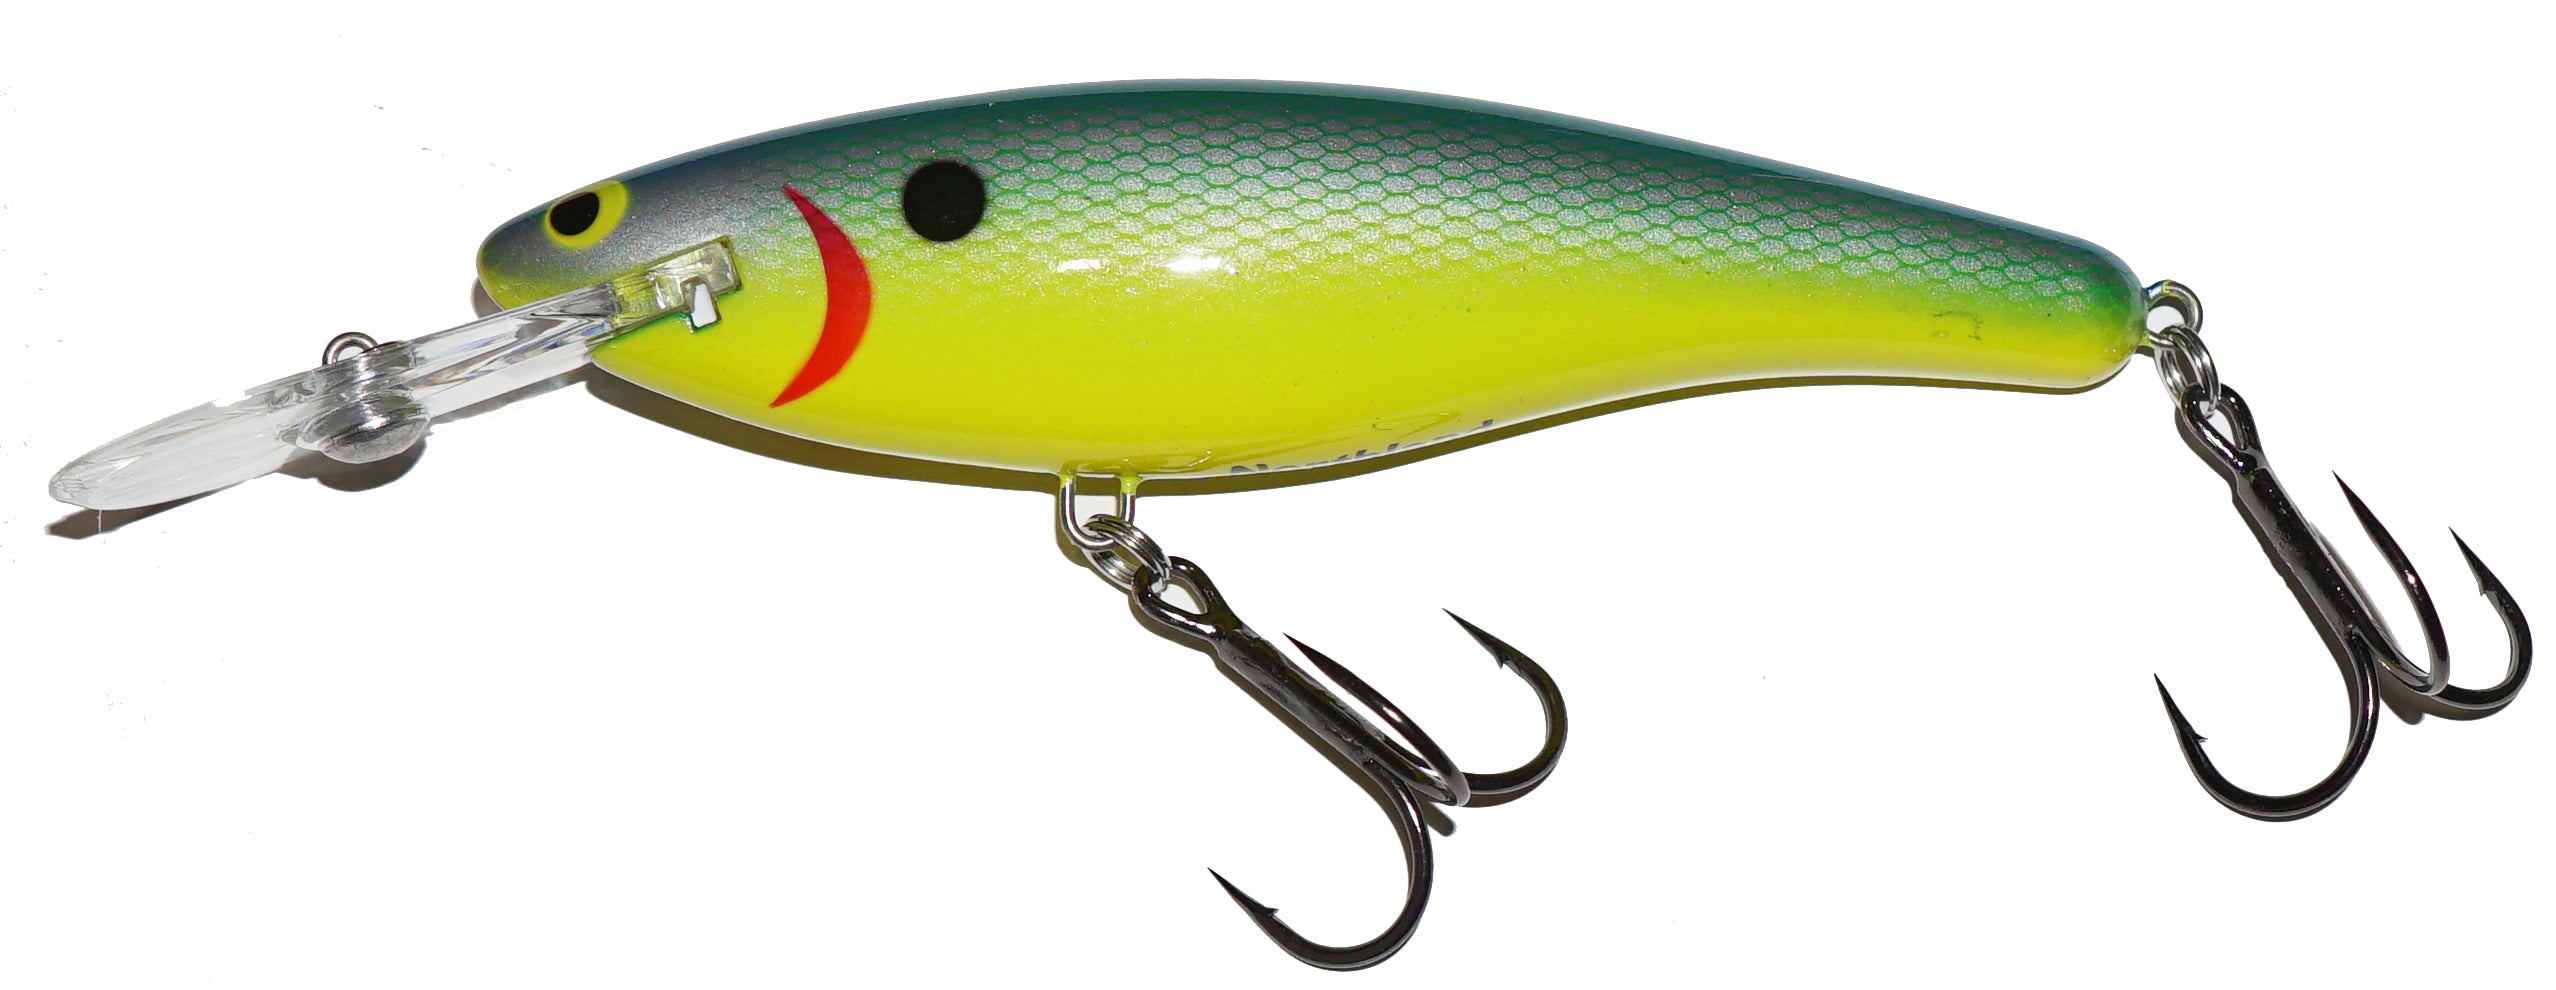 Northland Tackle Rumble Beast Size 6 - Parrot